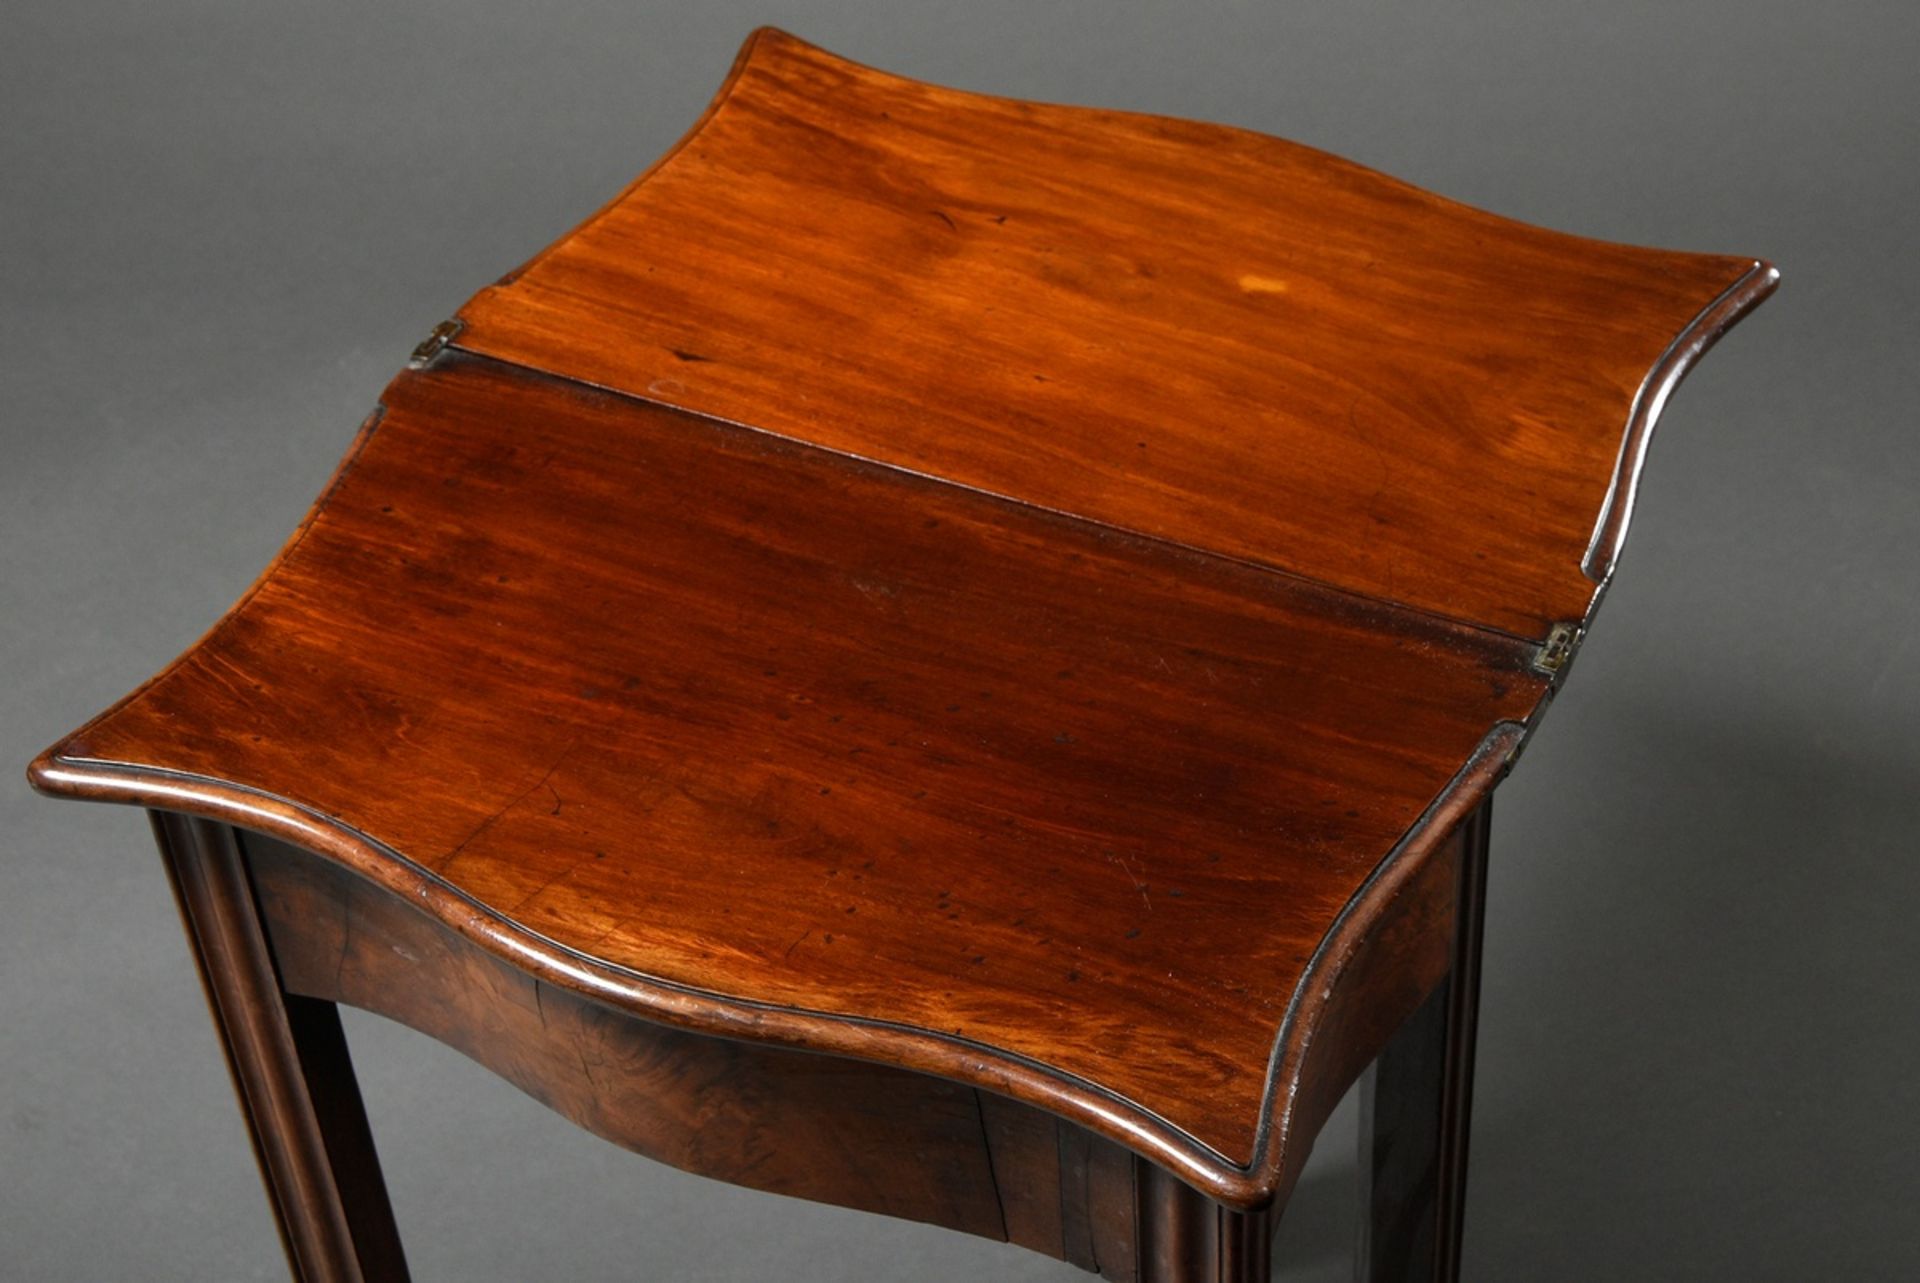 Small English mahogany folding table with straight legs, 70,5x48x27/53,5cm, 19th c. - Image 4 of 4